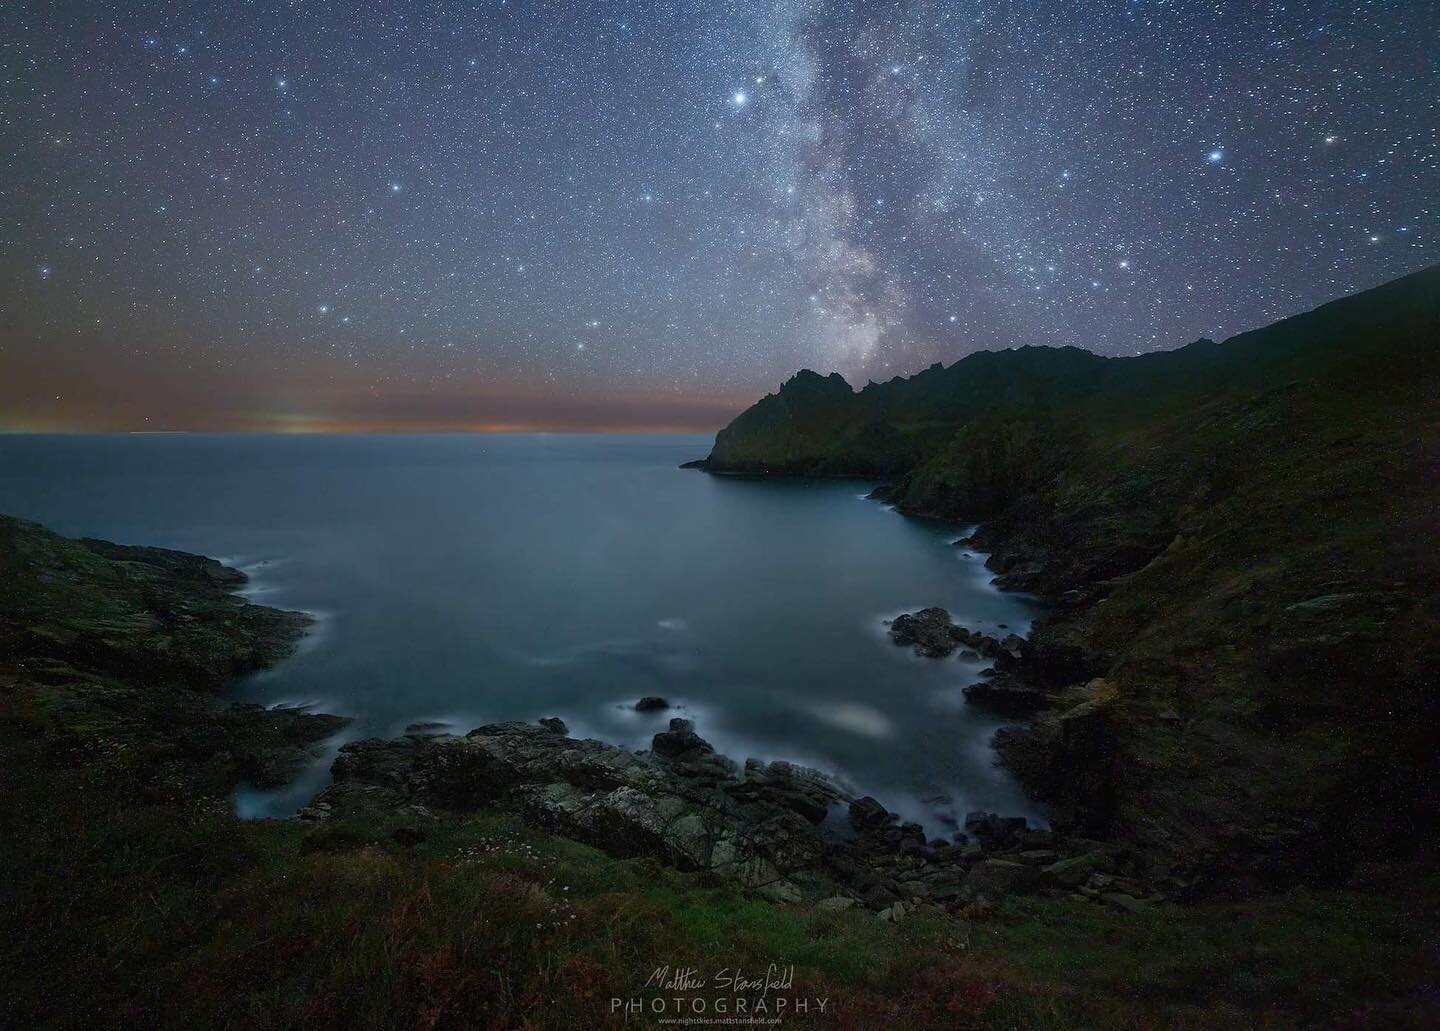 Prawle Point -Devon
Web: www.nightskies.mattstansfield.com 

December continues to be clouded out for me, so I thought I would re-visit a coastal image I captured from Prawke Point,  back in September. For anyone who hasn't been, the south Devon coas